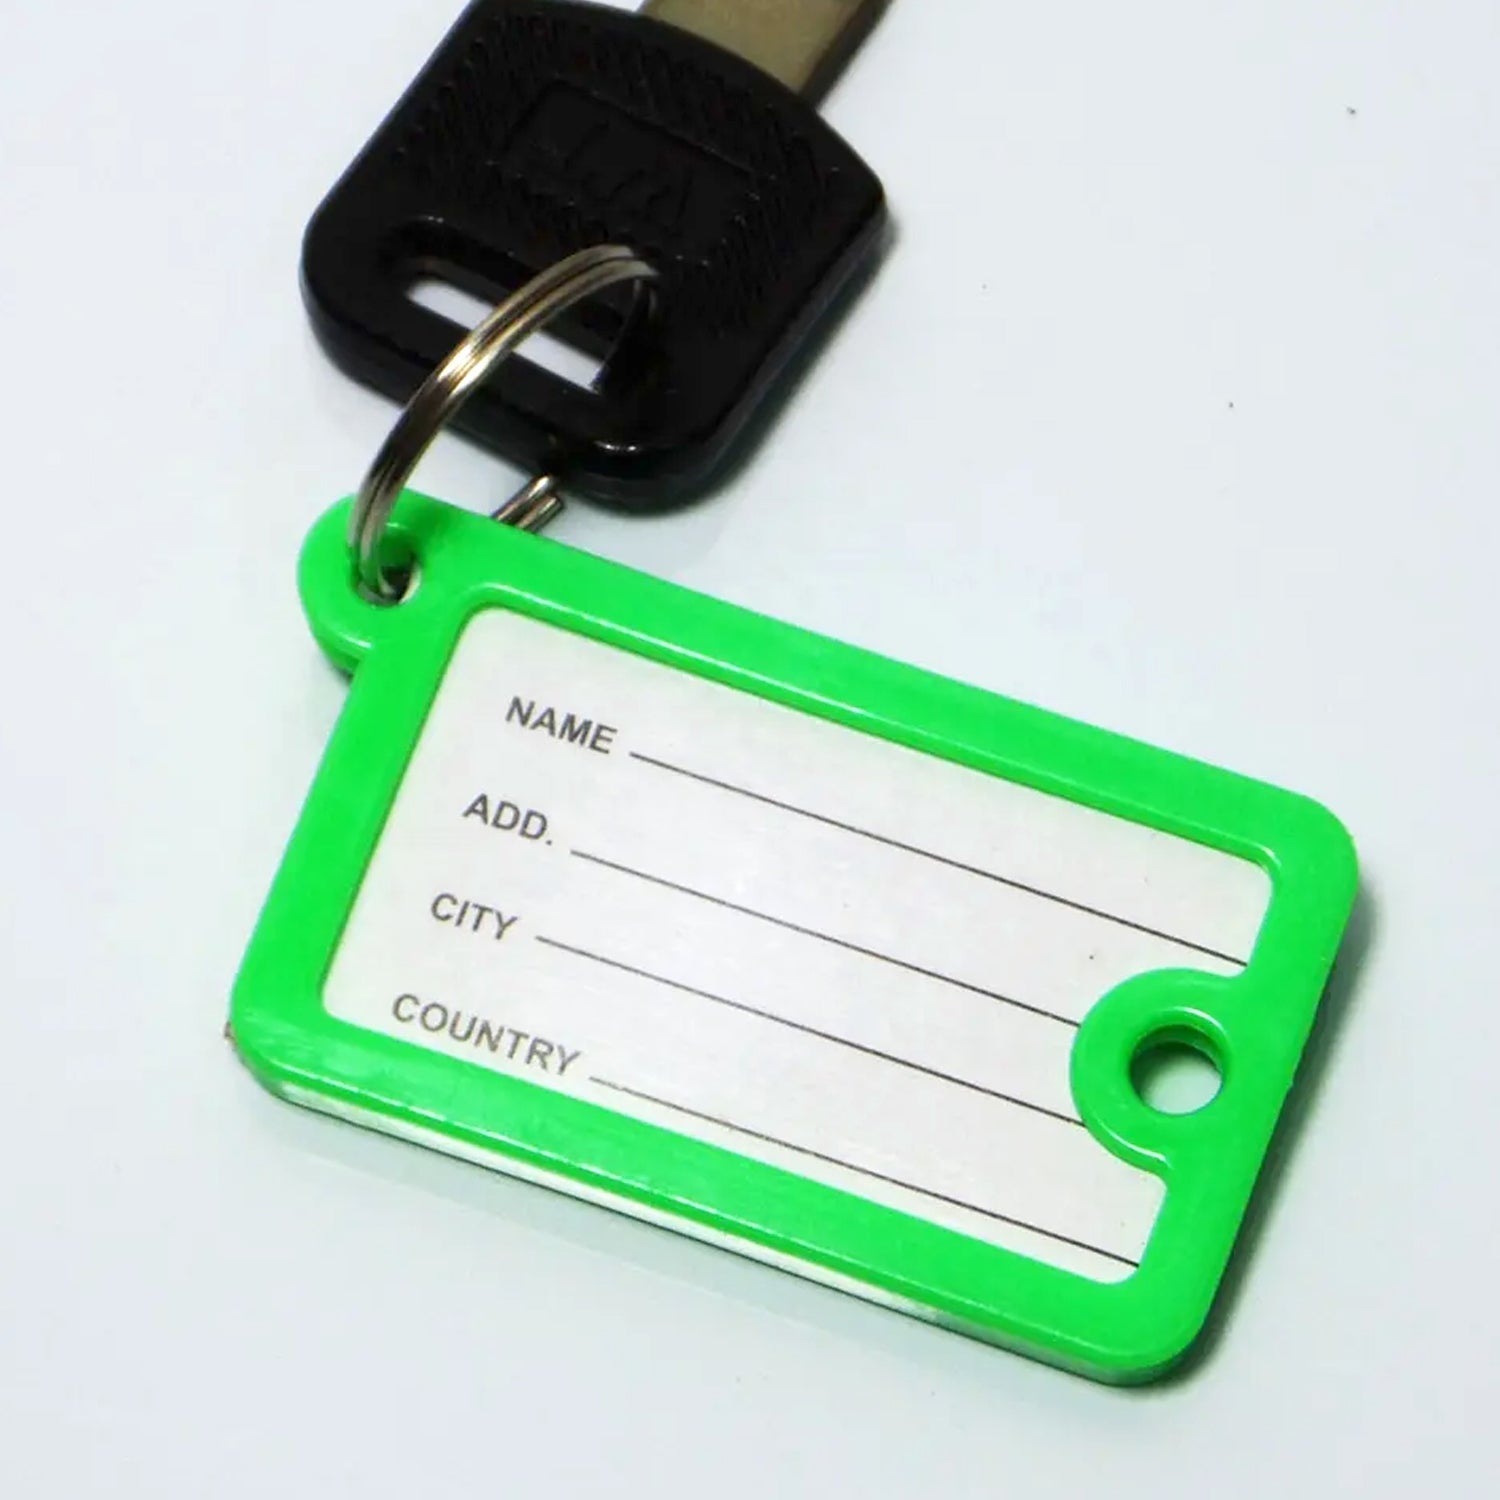 Wallet Keychain 10 pcs Set Plastic Key Custom Key Tags Key Ring Tags Numbered Key Tags Tags with Backpack Keychain